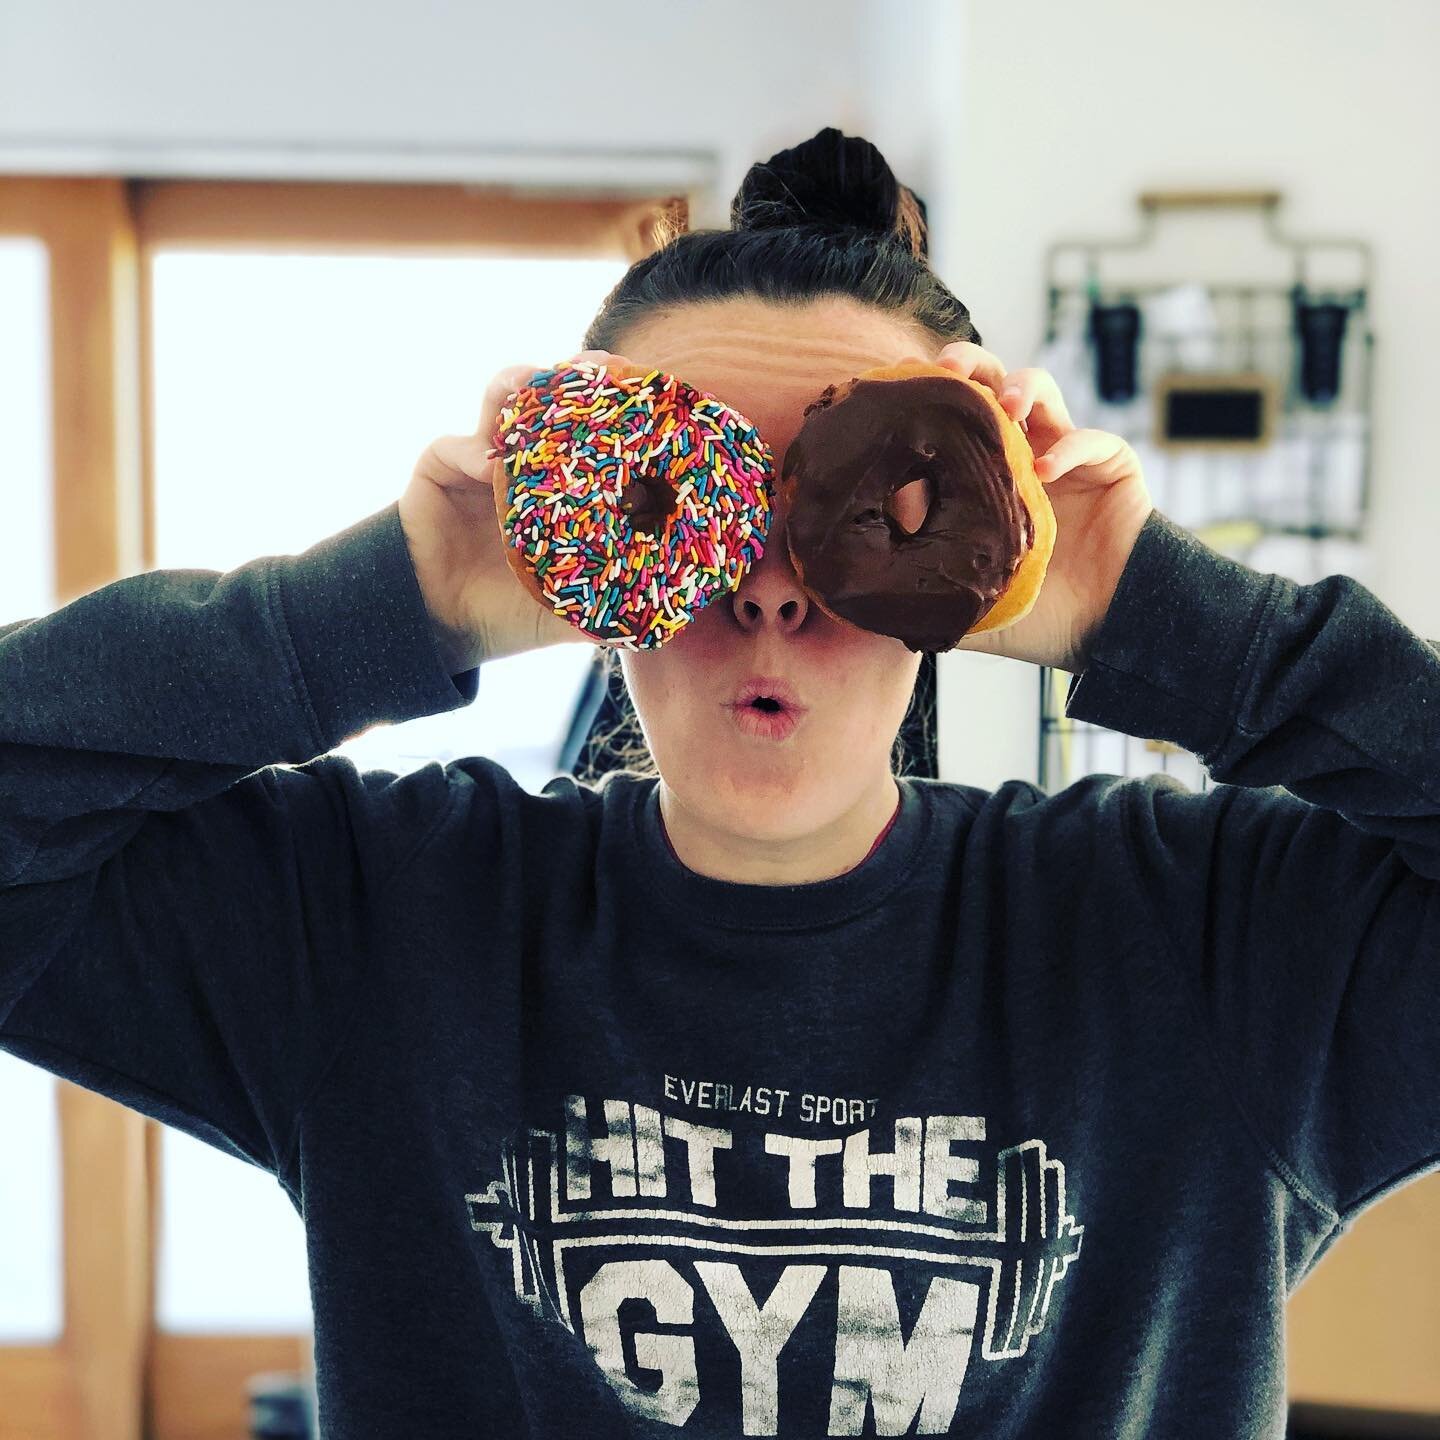 Are you tired of skipping donuts with your kids in order to lose weight?!⁠⁠
⁠⁠
GIRL! I HEAR YOU!! ⁠⁠
⁠⁠
I was meeting with a client recently and she said she was frustrated with constantly thinking about food, not seeing changes and getting frustrate